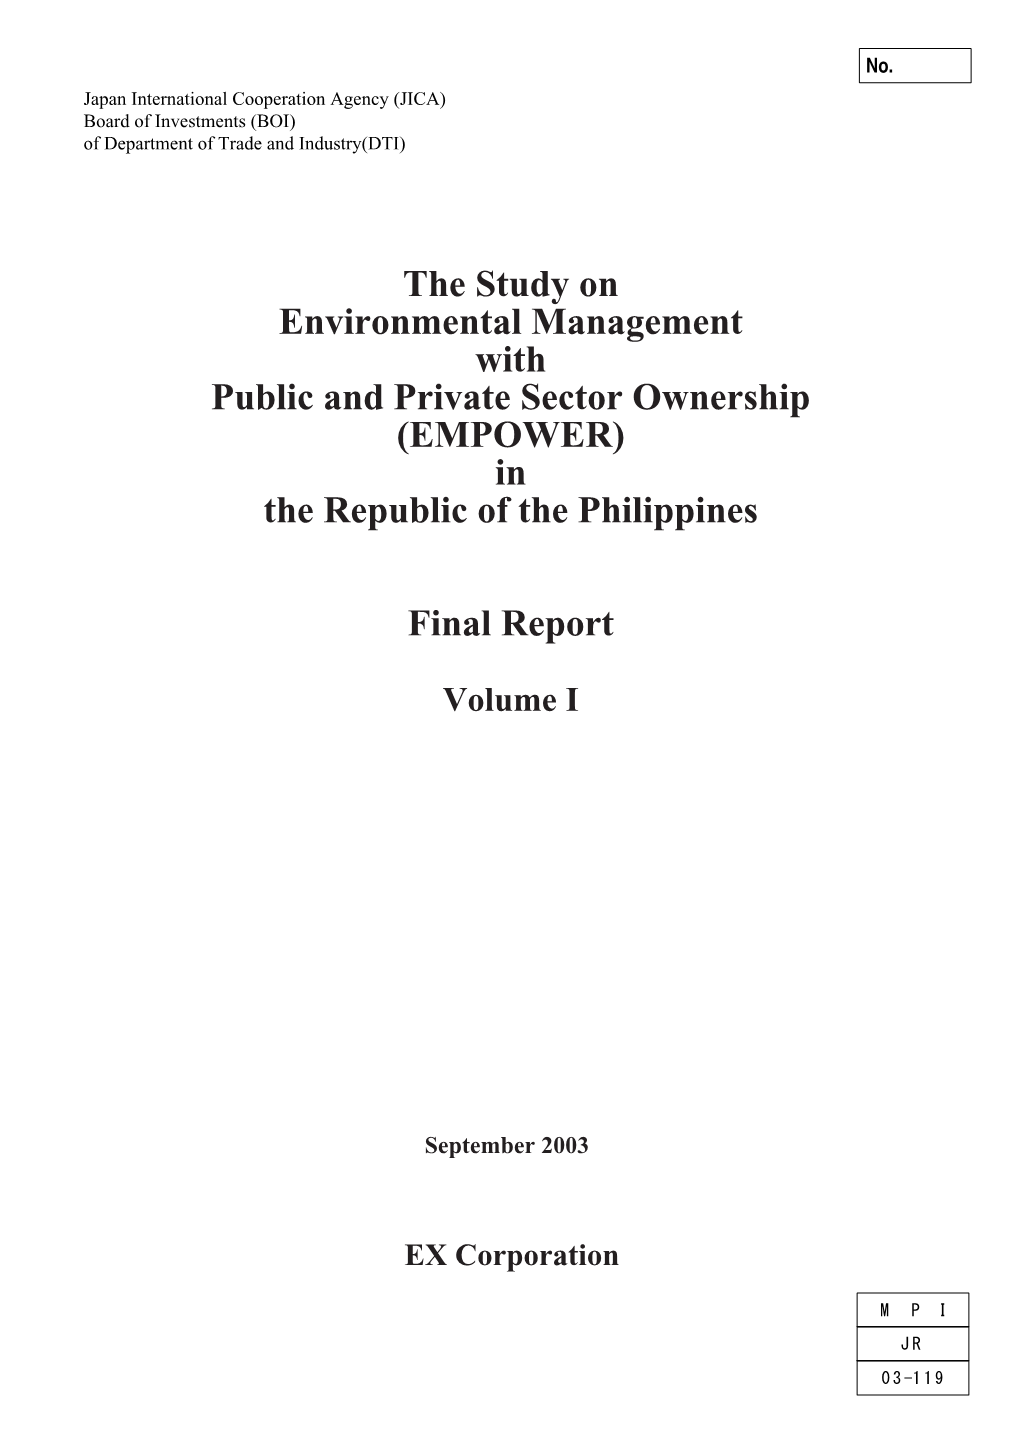 (EMPOWER) in the Republic of the Philippines Fina